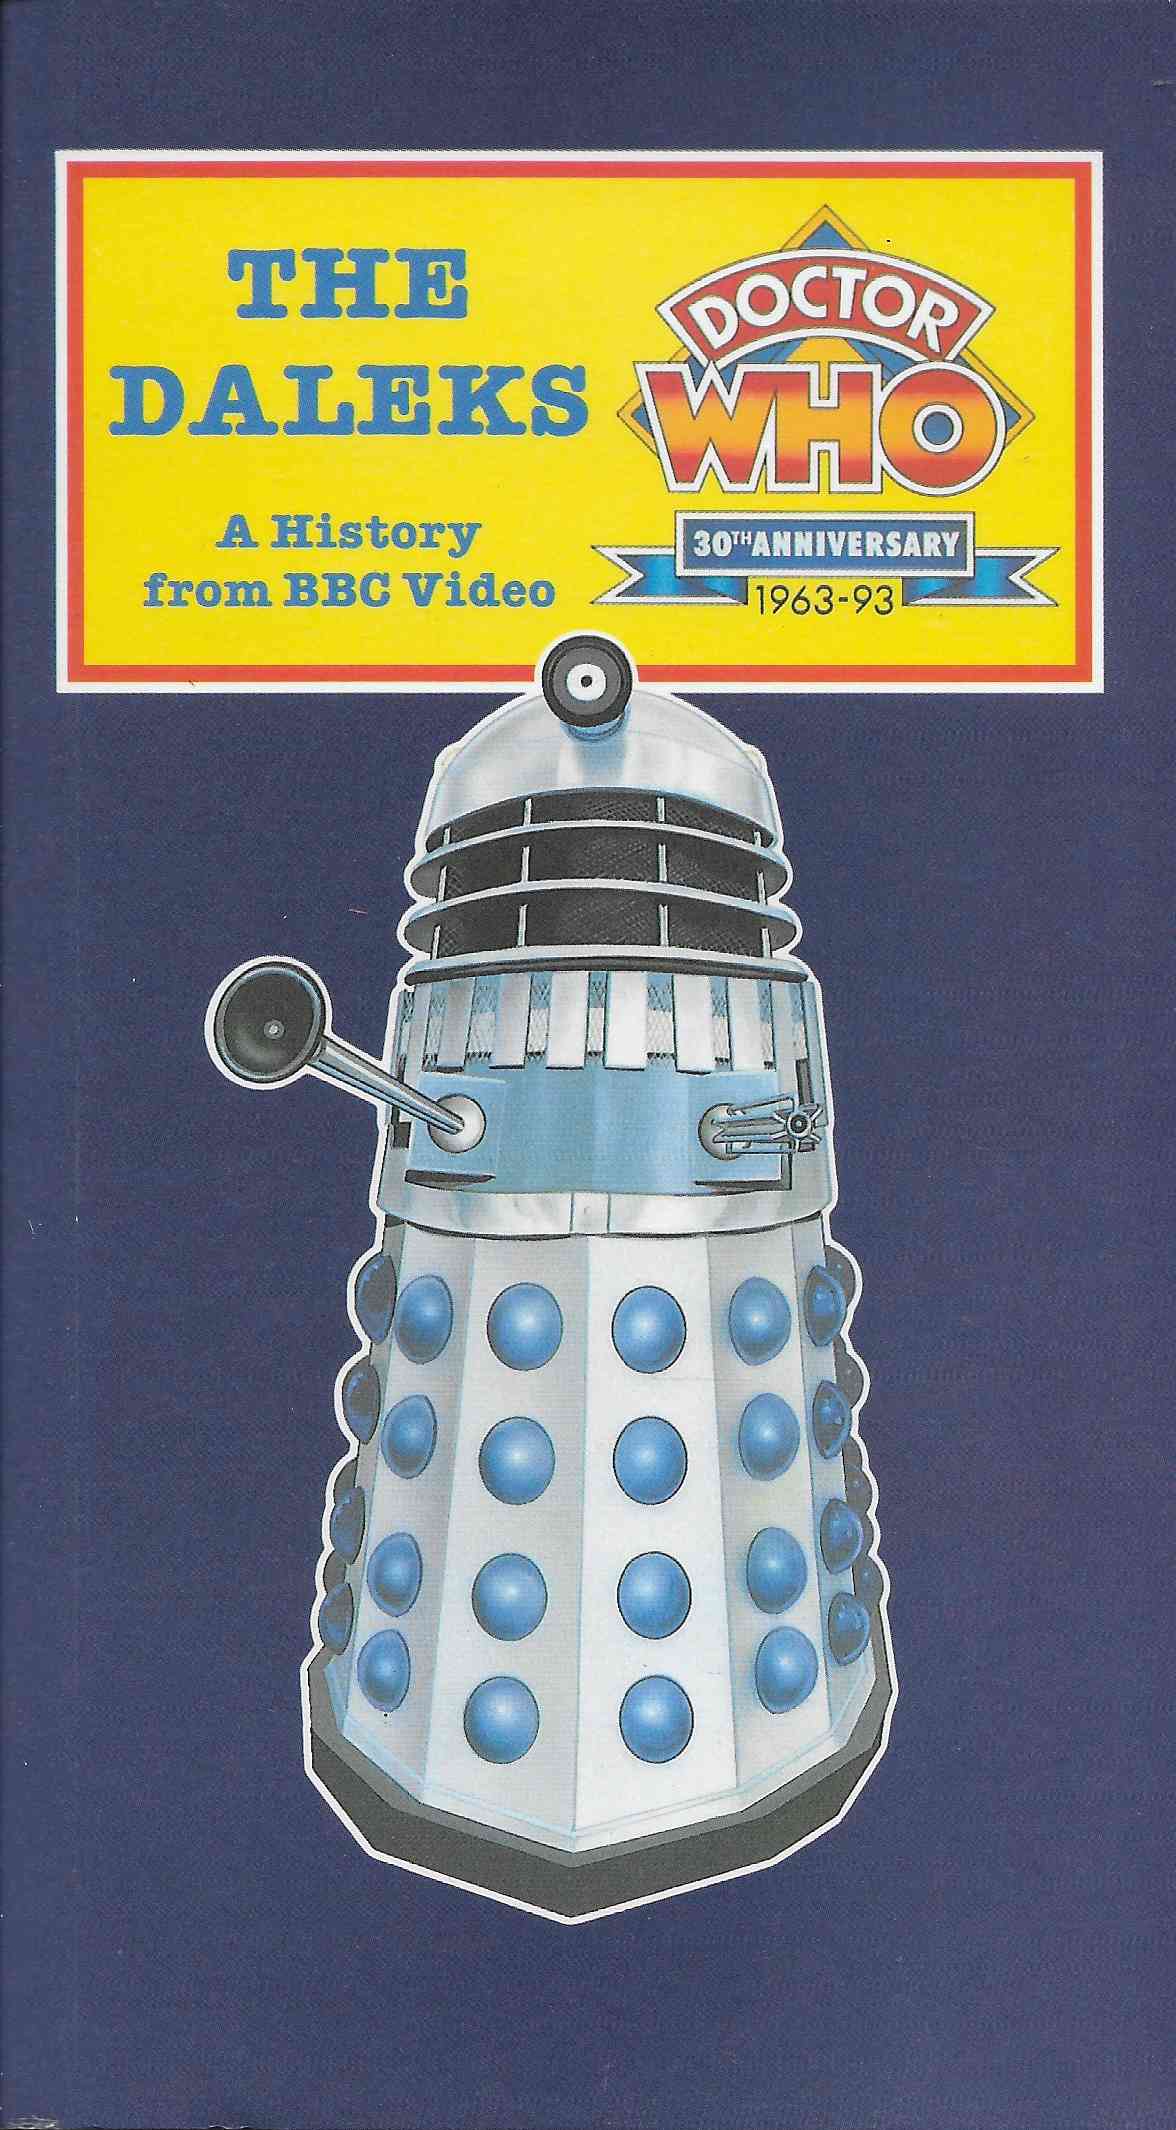 Picture of Books-BBCV-Daleks The Daleks - A history from BBC Video by artist Andrew Pixley / Michael McManus from the BBC records and Tapes library